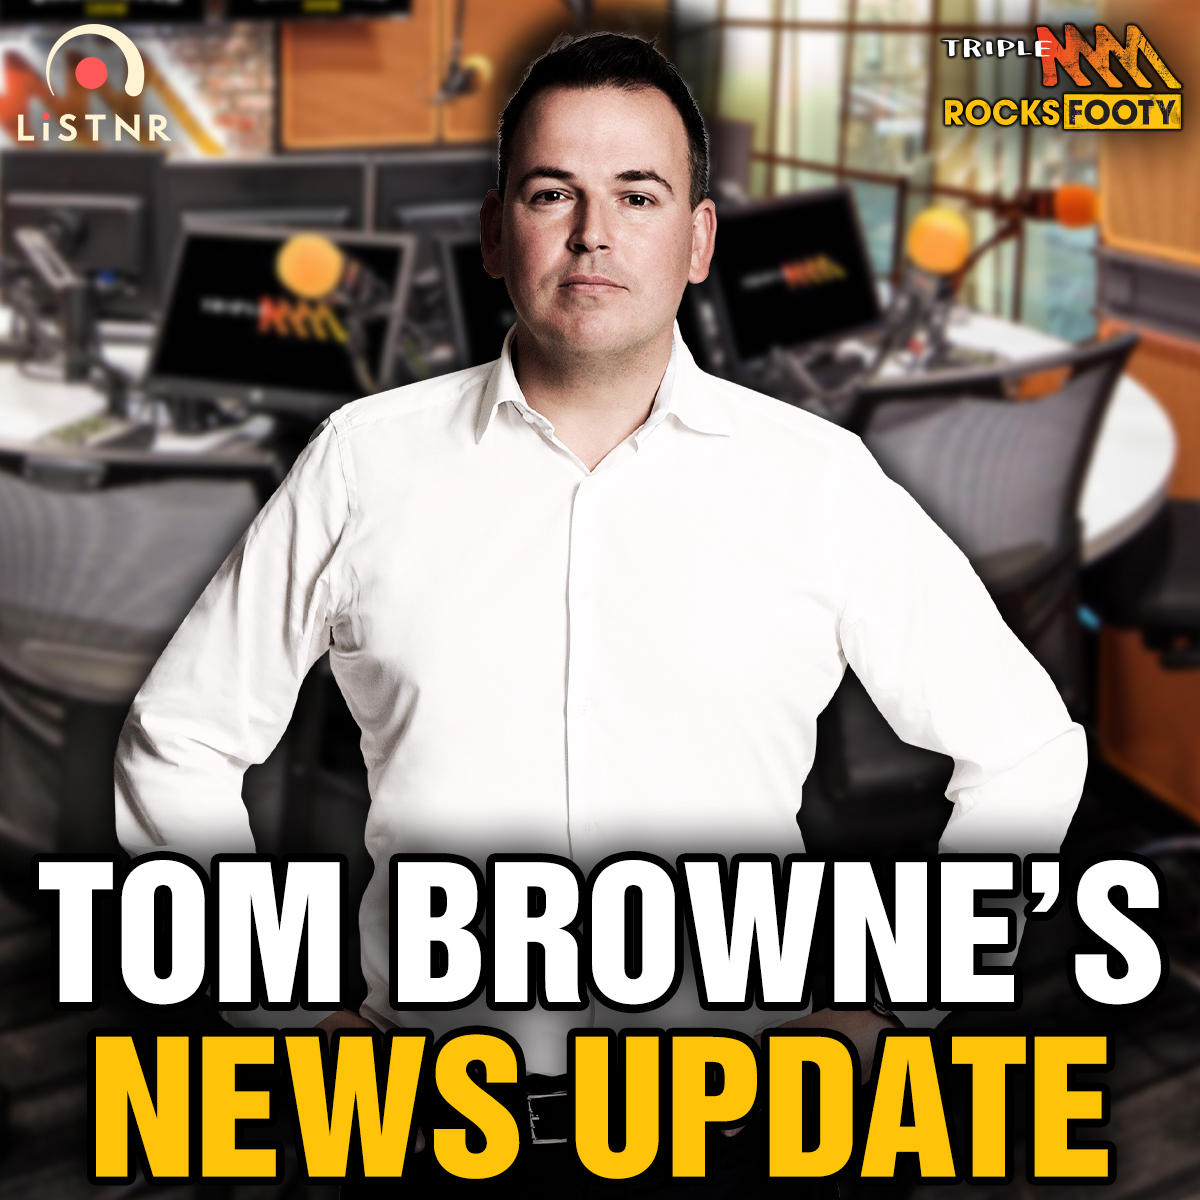 Tom Browne's News Update - Pay deal update, Dangerfield's weeks off, fans getting used to the new ticketing process